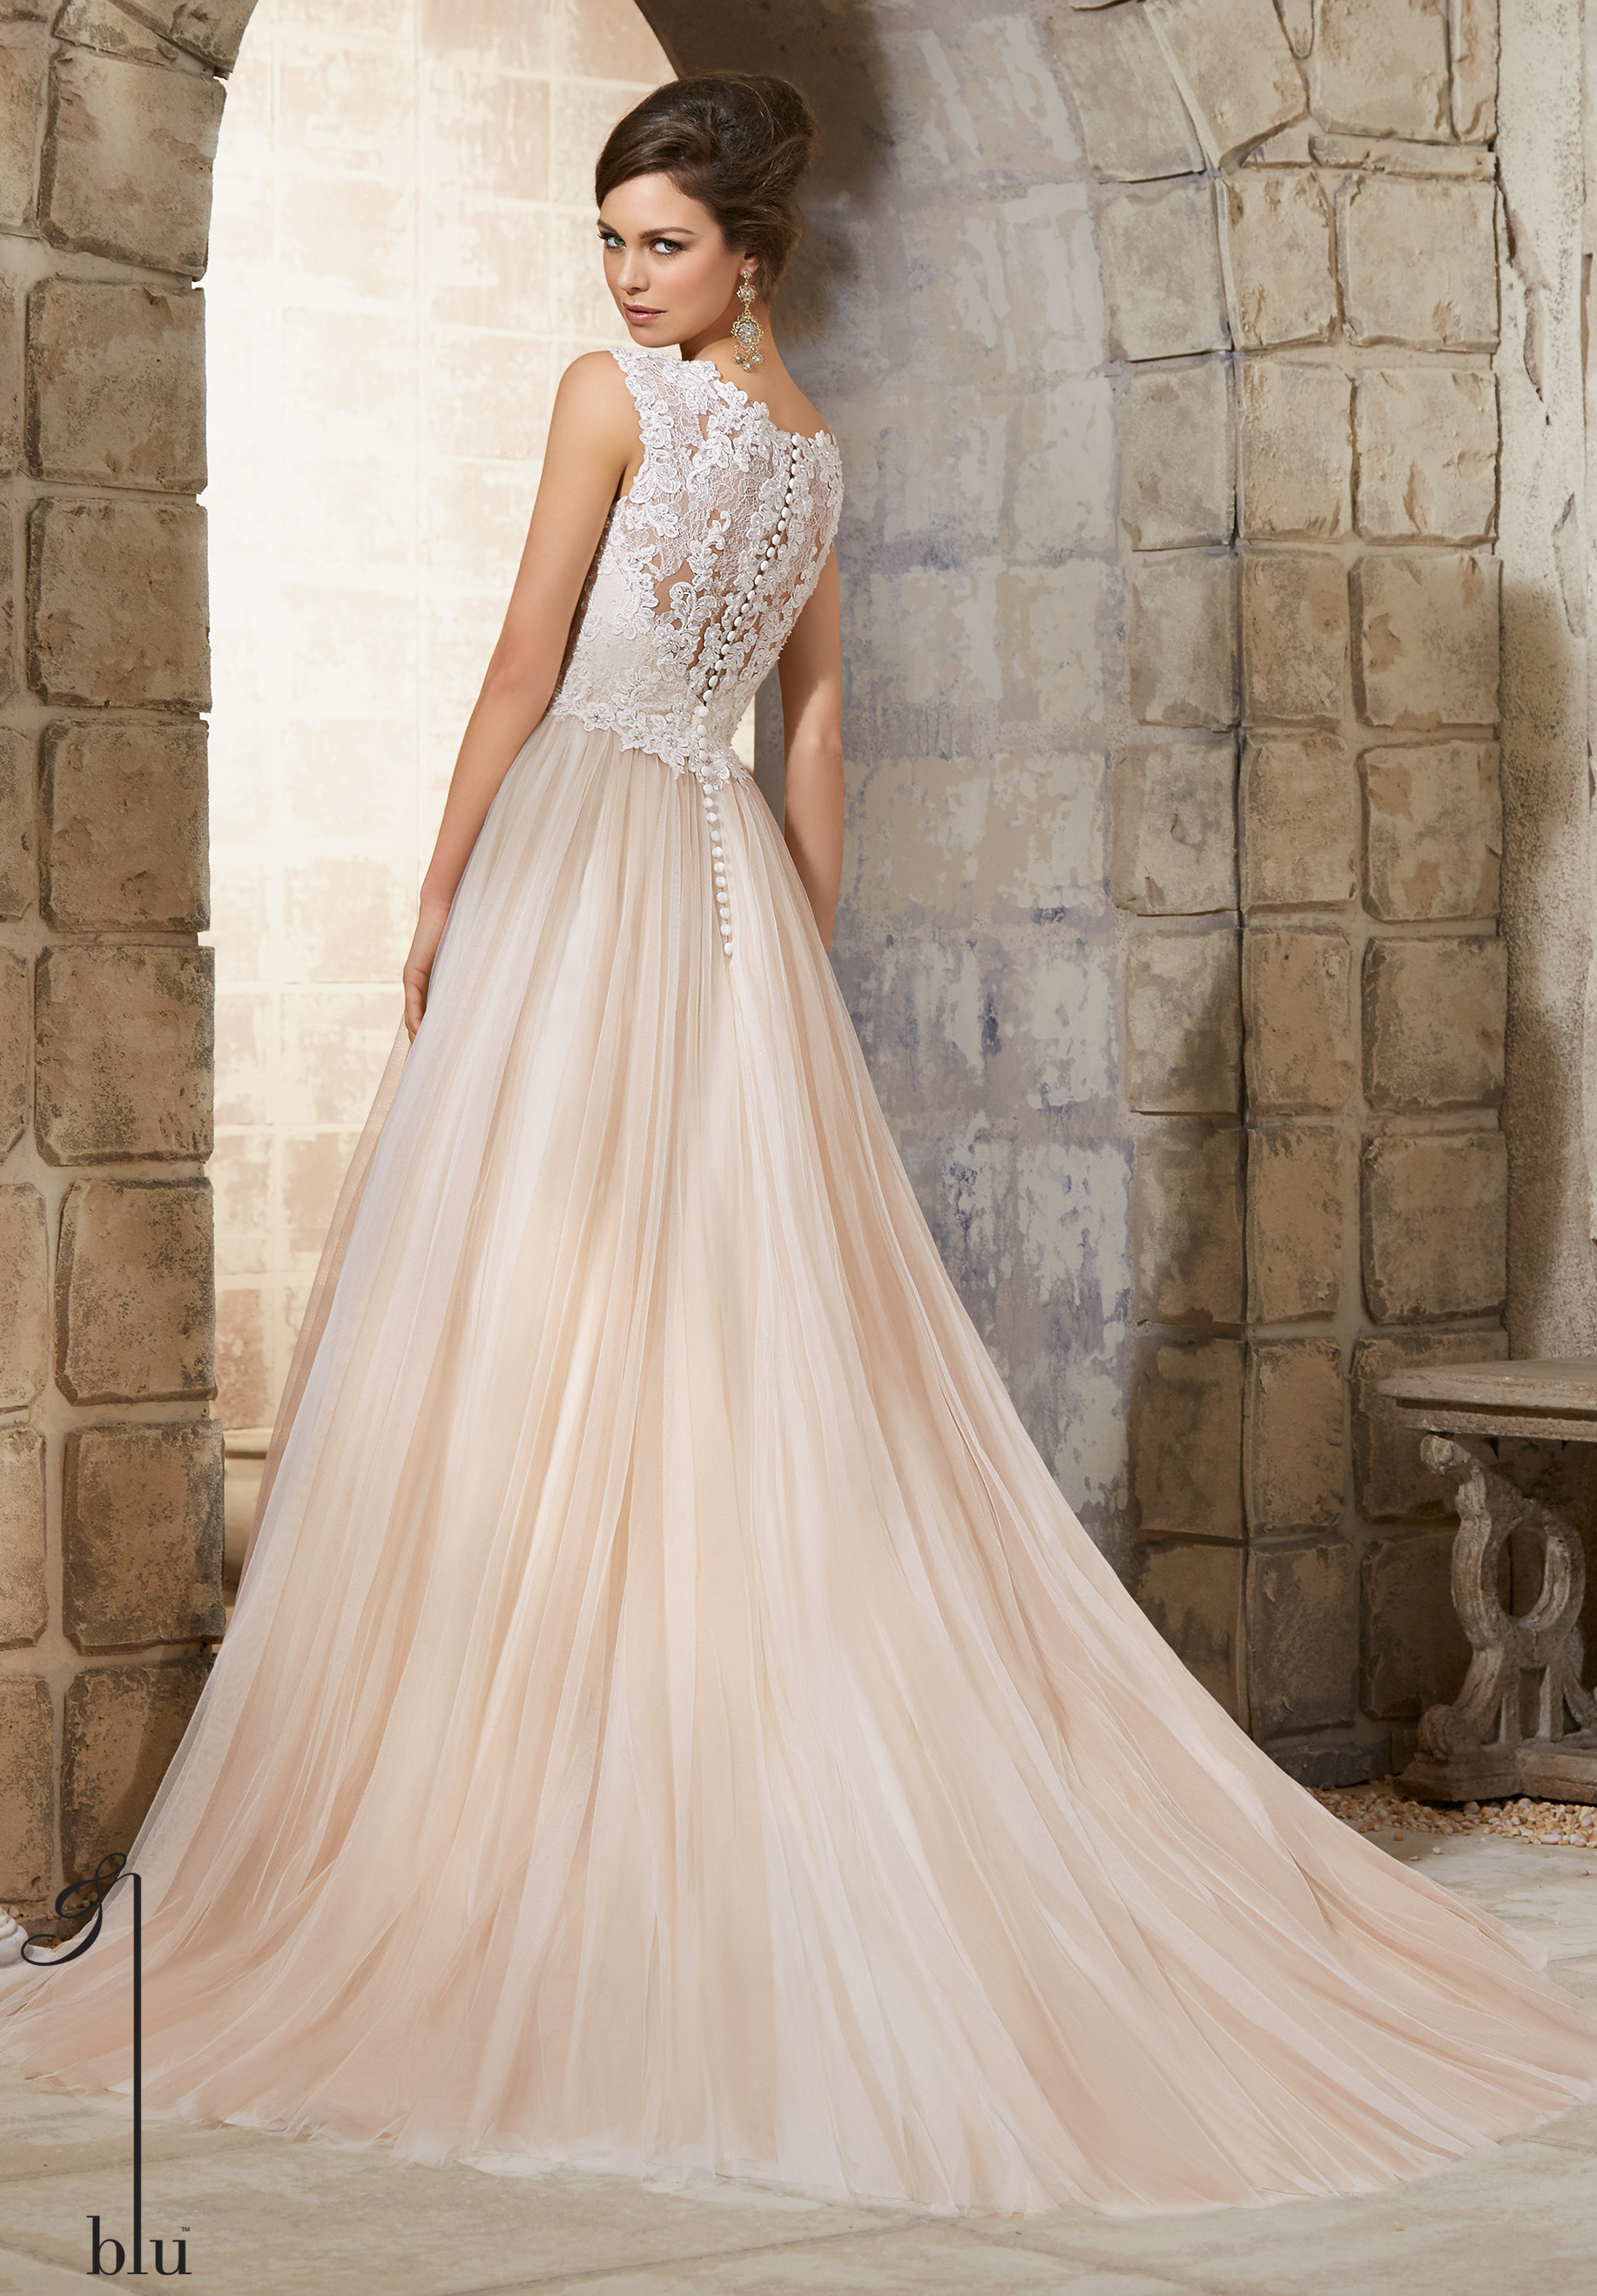 Our Favorite Wedding Dress Is Back Providence Place Bridal